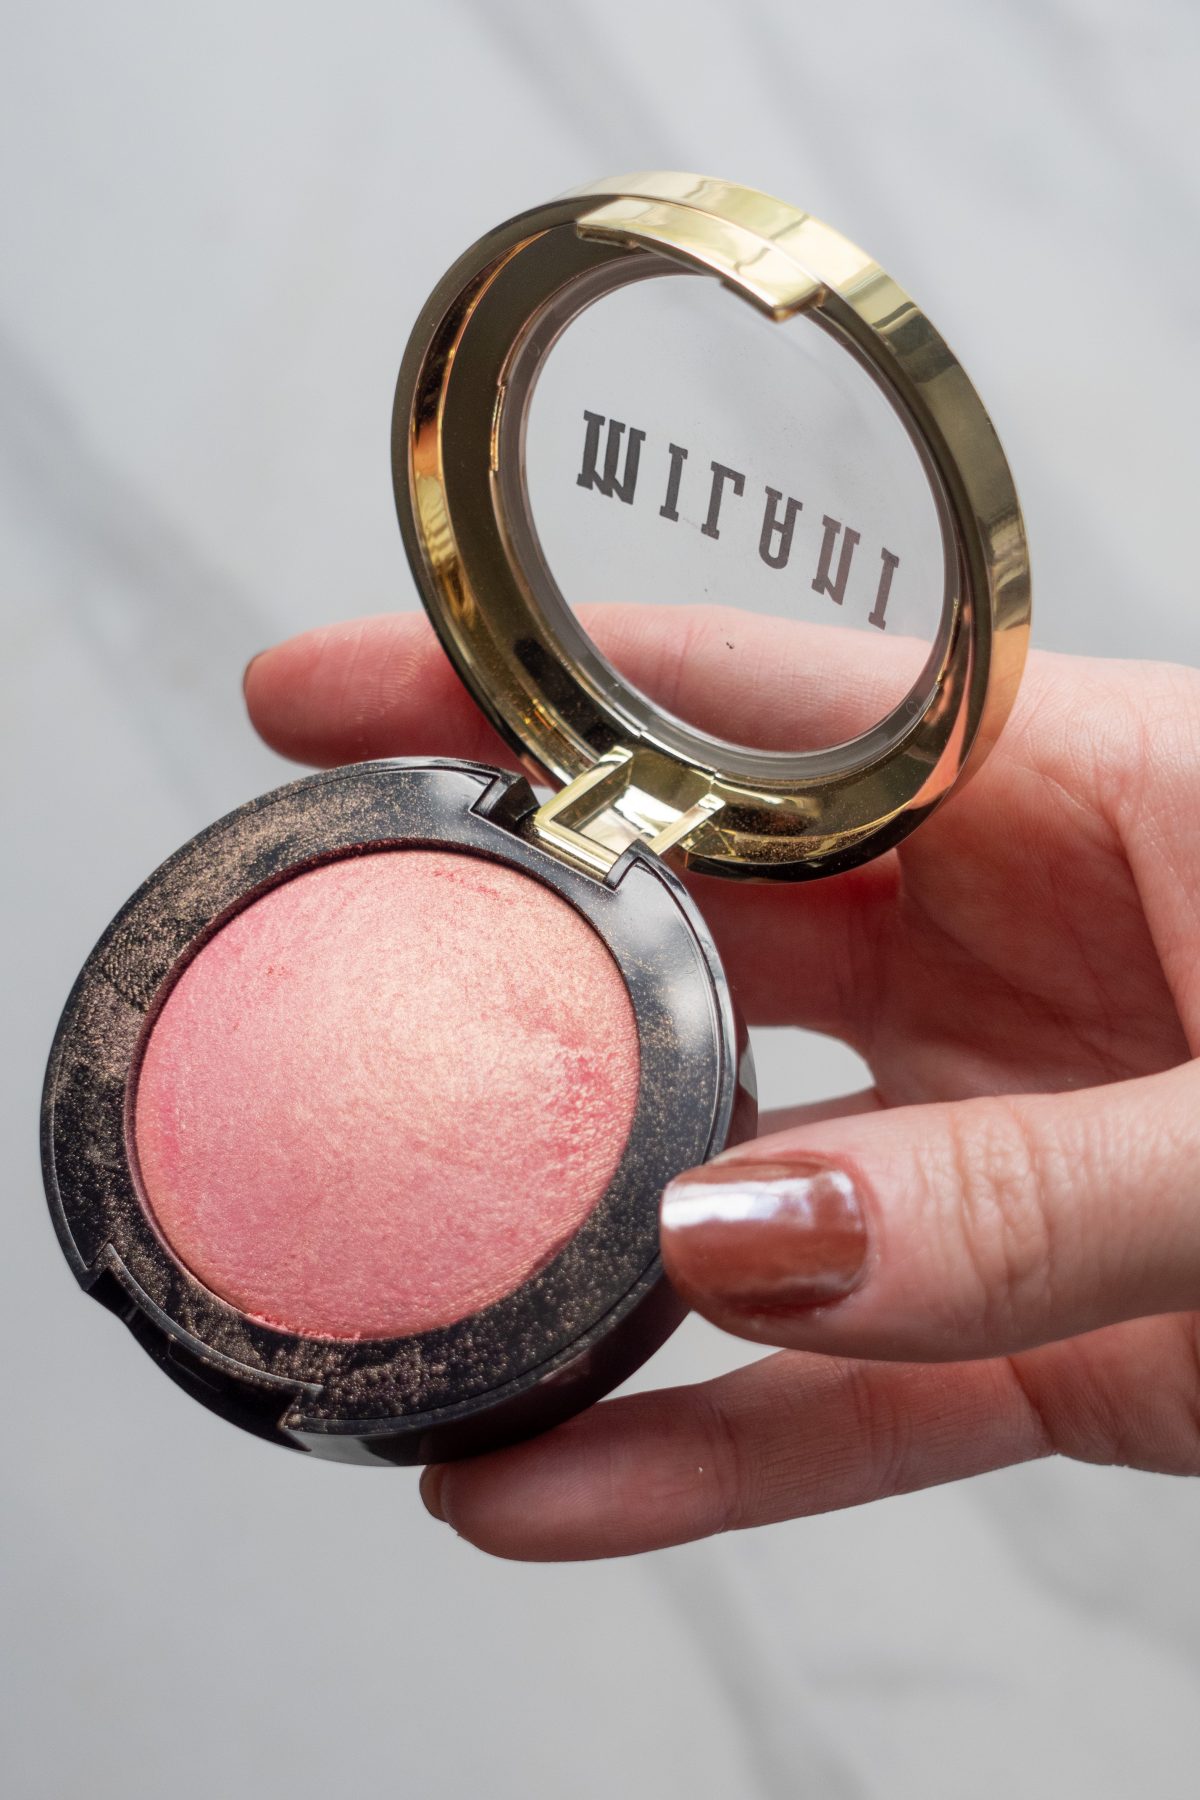 Milani Baked Blush Review and Swatches - Bella Bellini